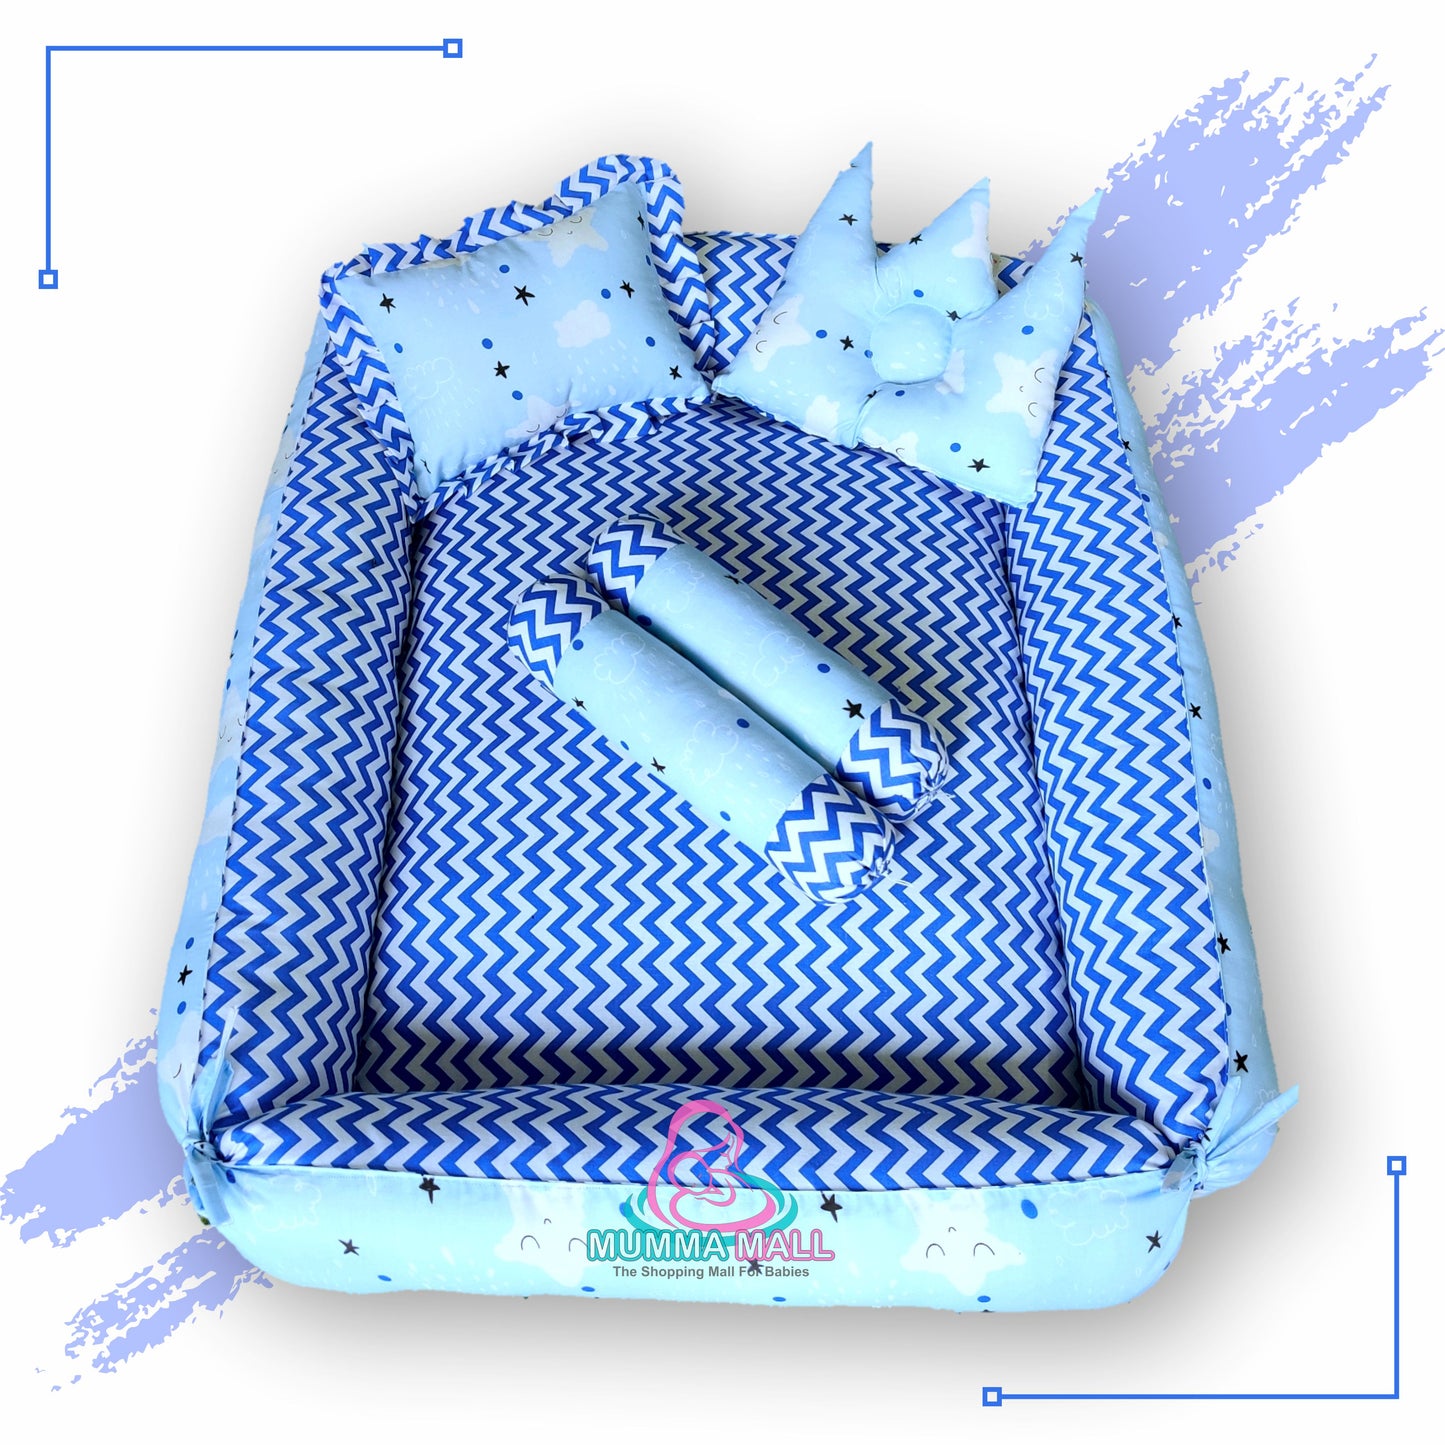 Baby box mattress with blanket and set of 4 pillows as neck support, side support and toy (Sky and Blue)